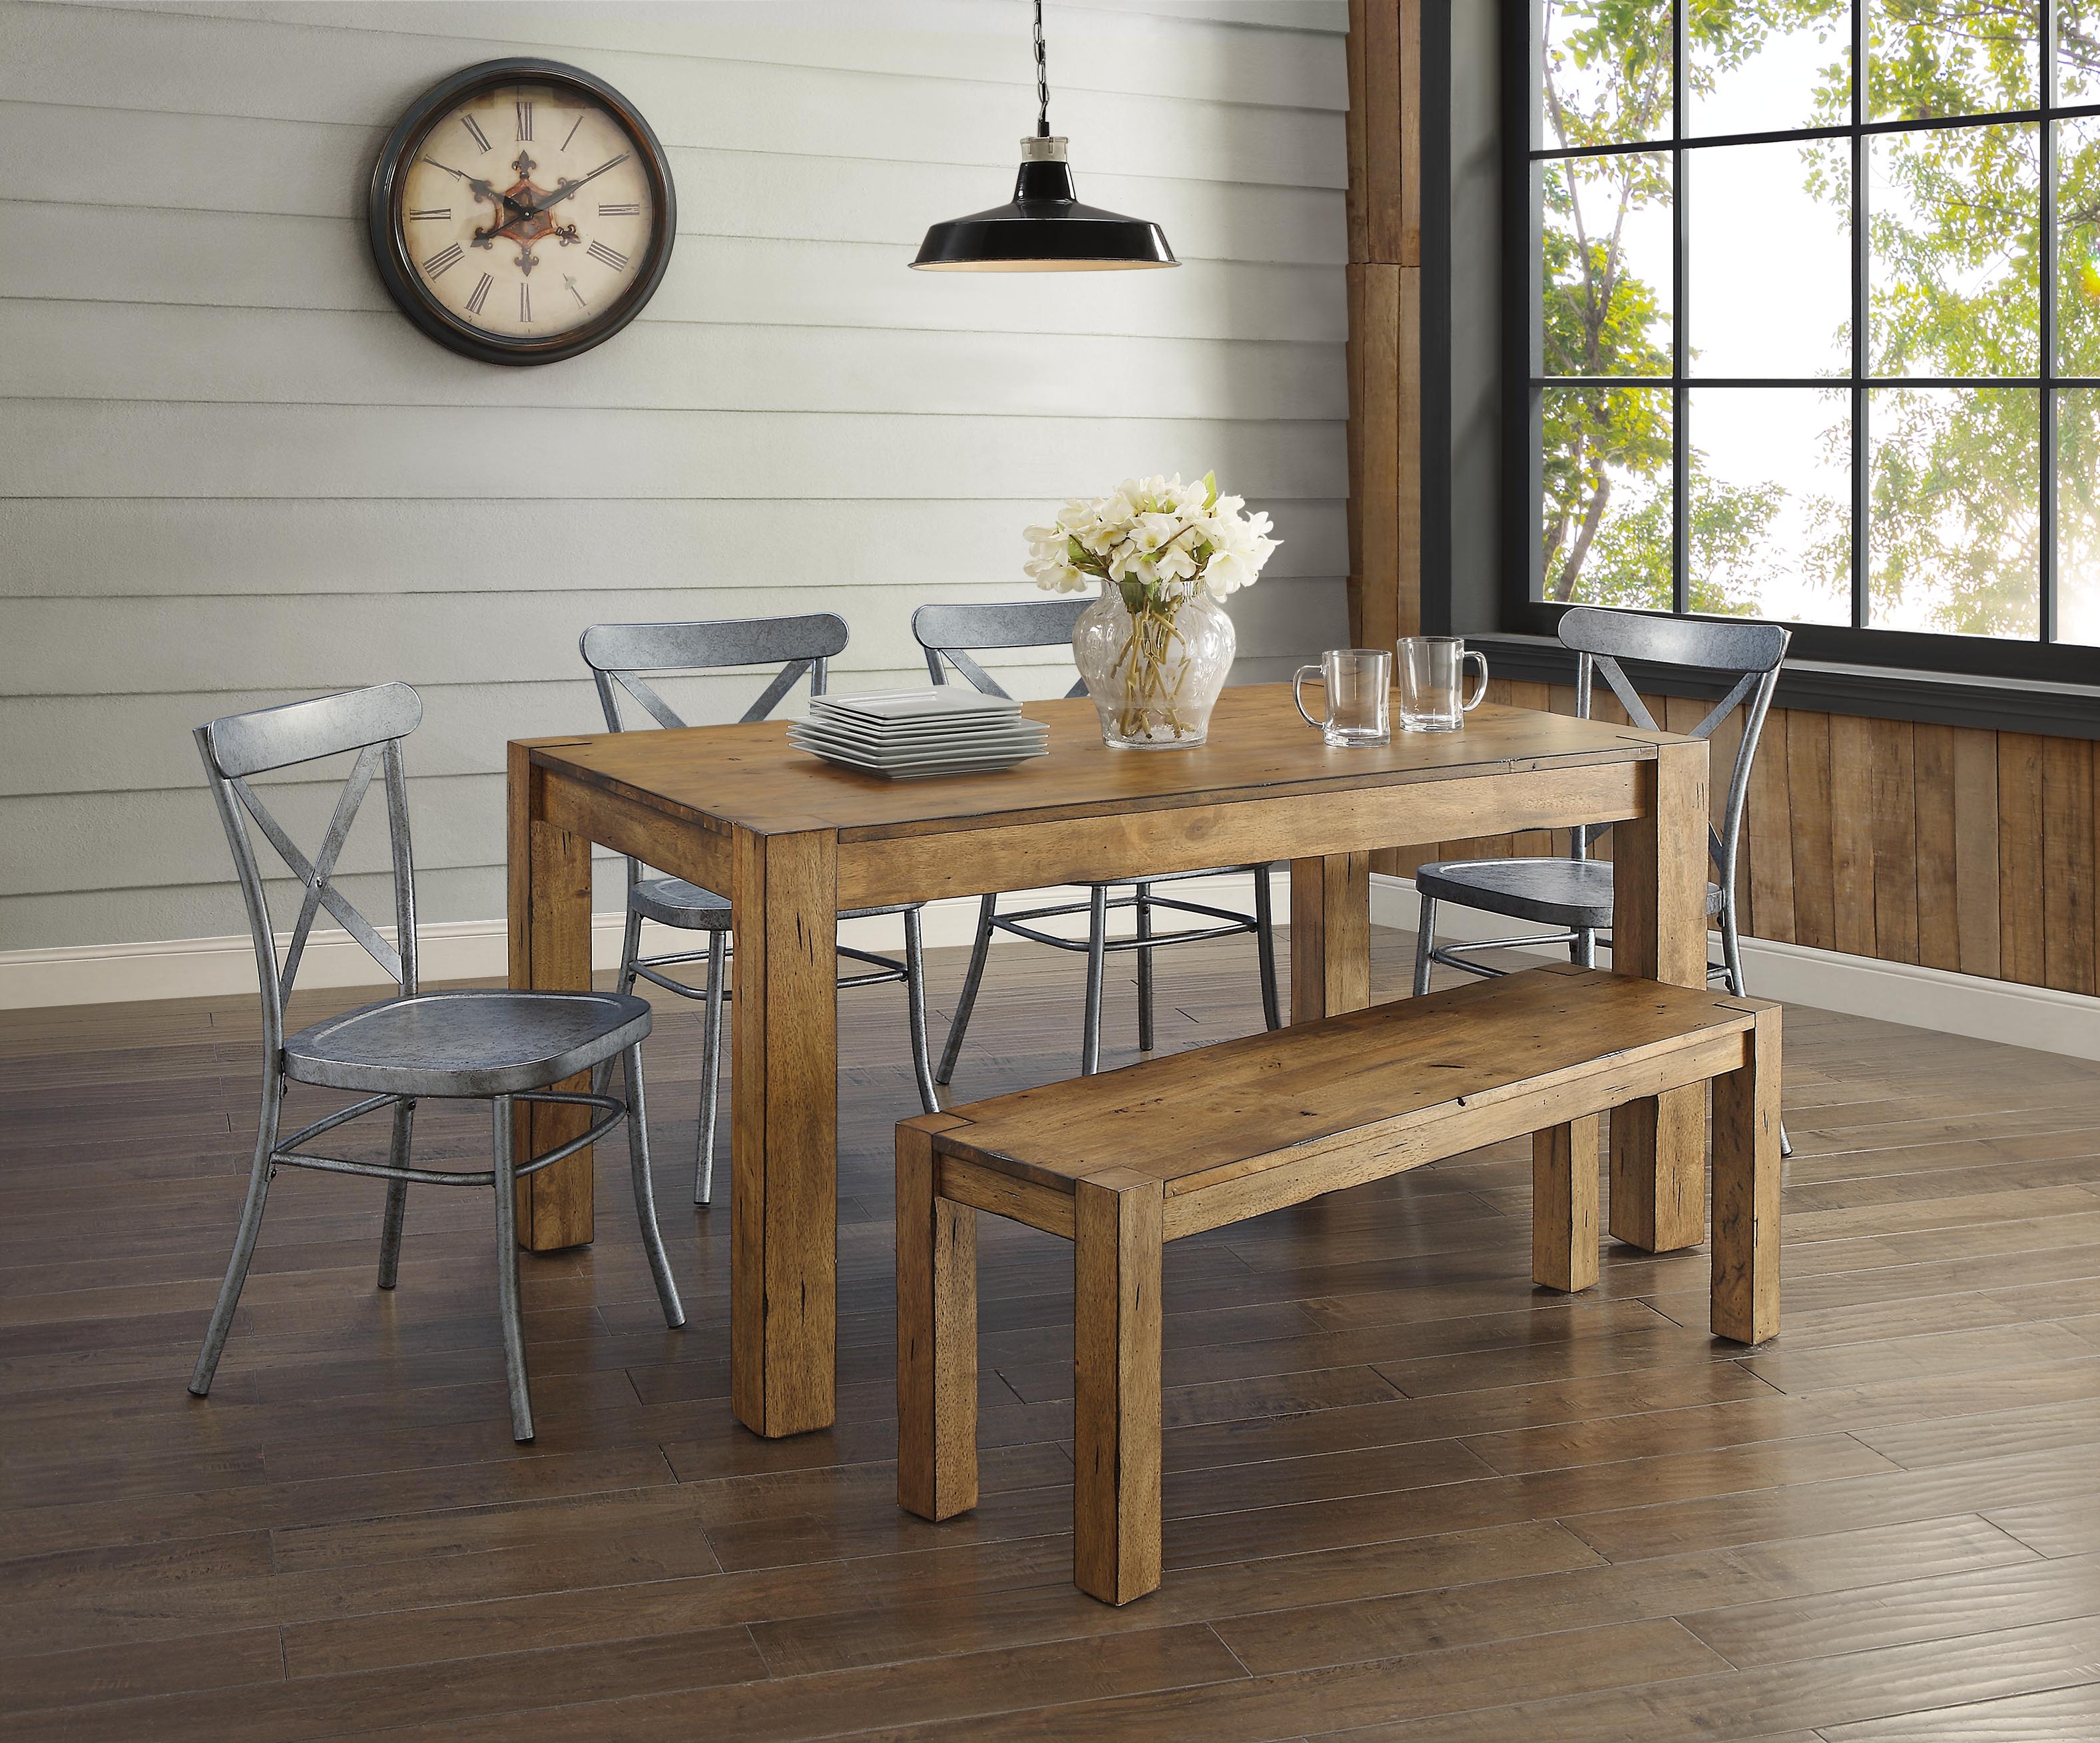 Better Homes & Gardens Bryant Solid Wood Dining Table, Rustic Brown - image 14 of 14